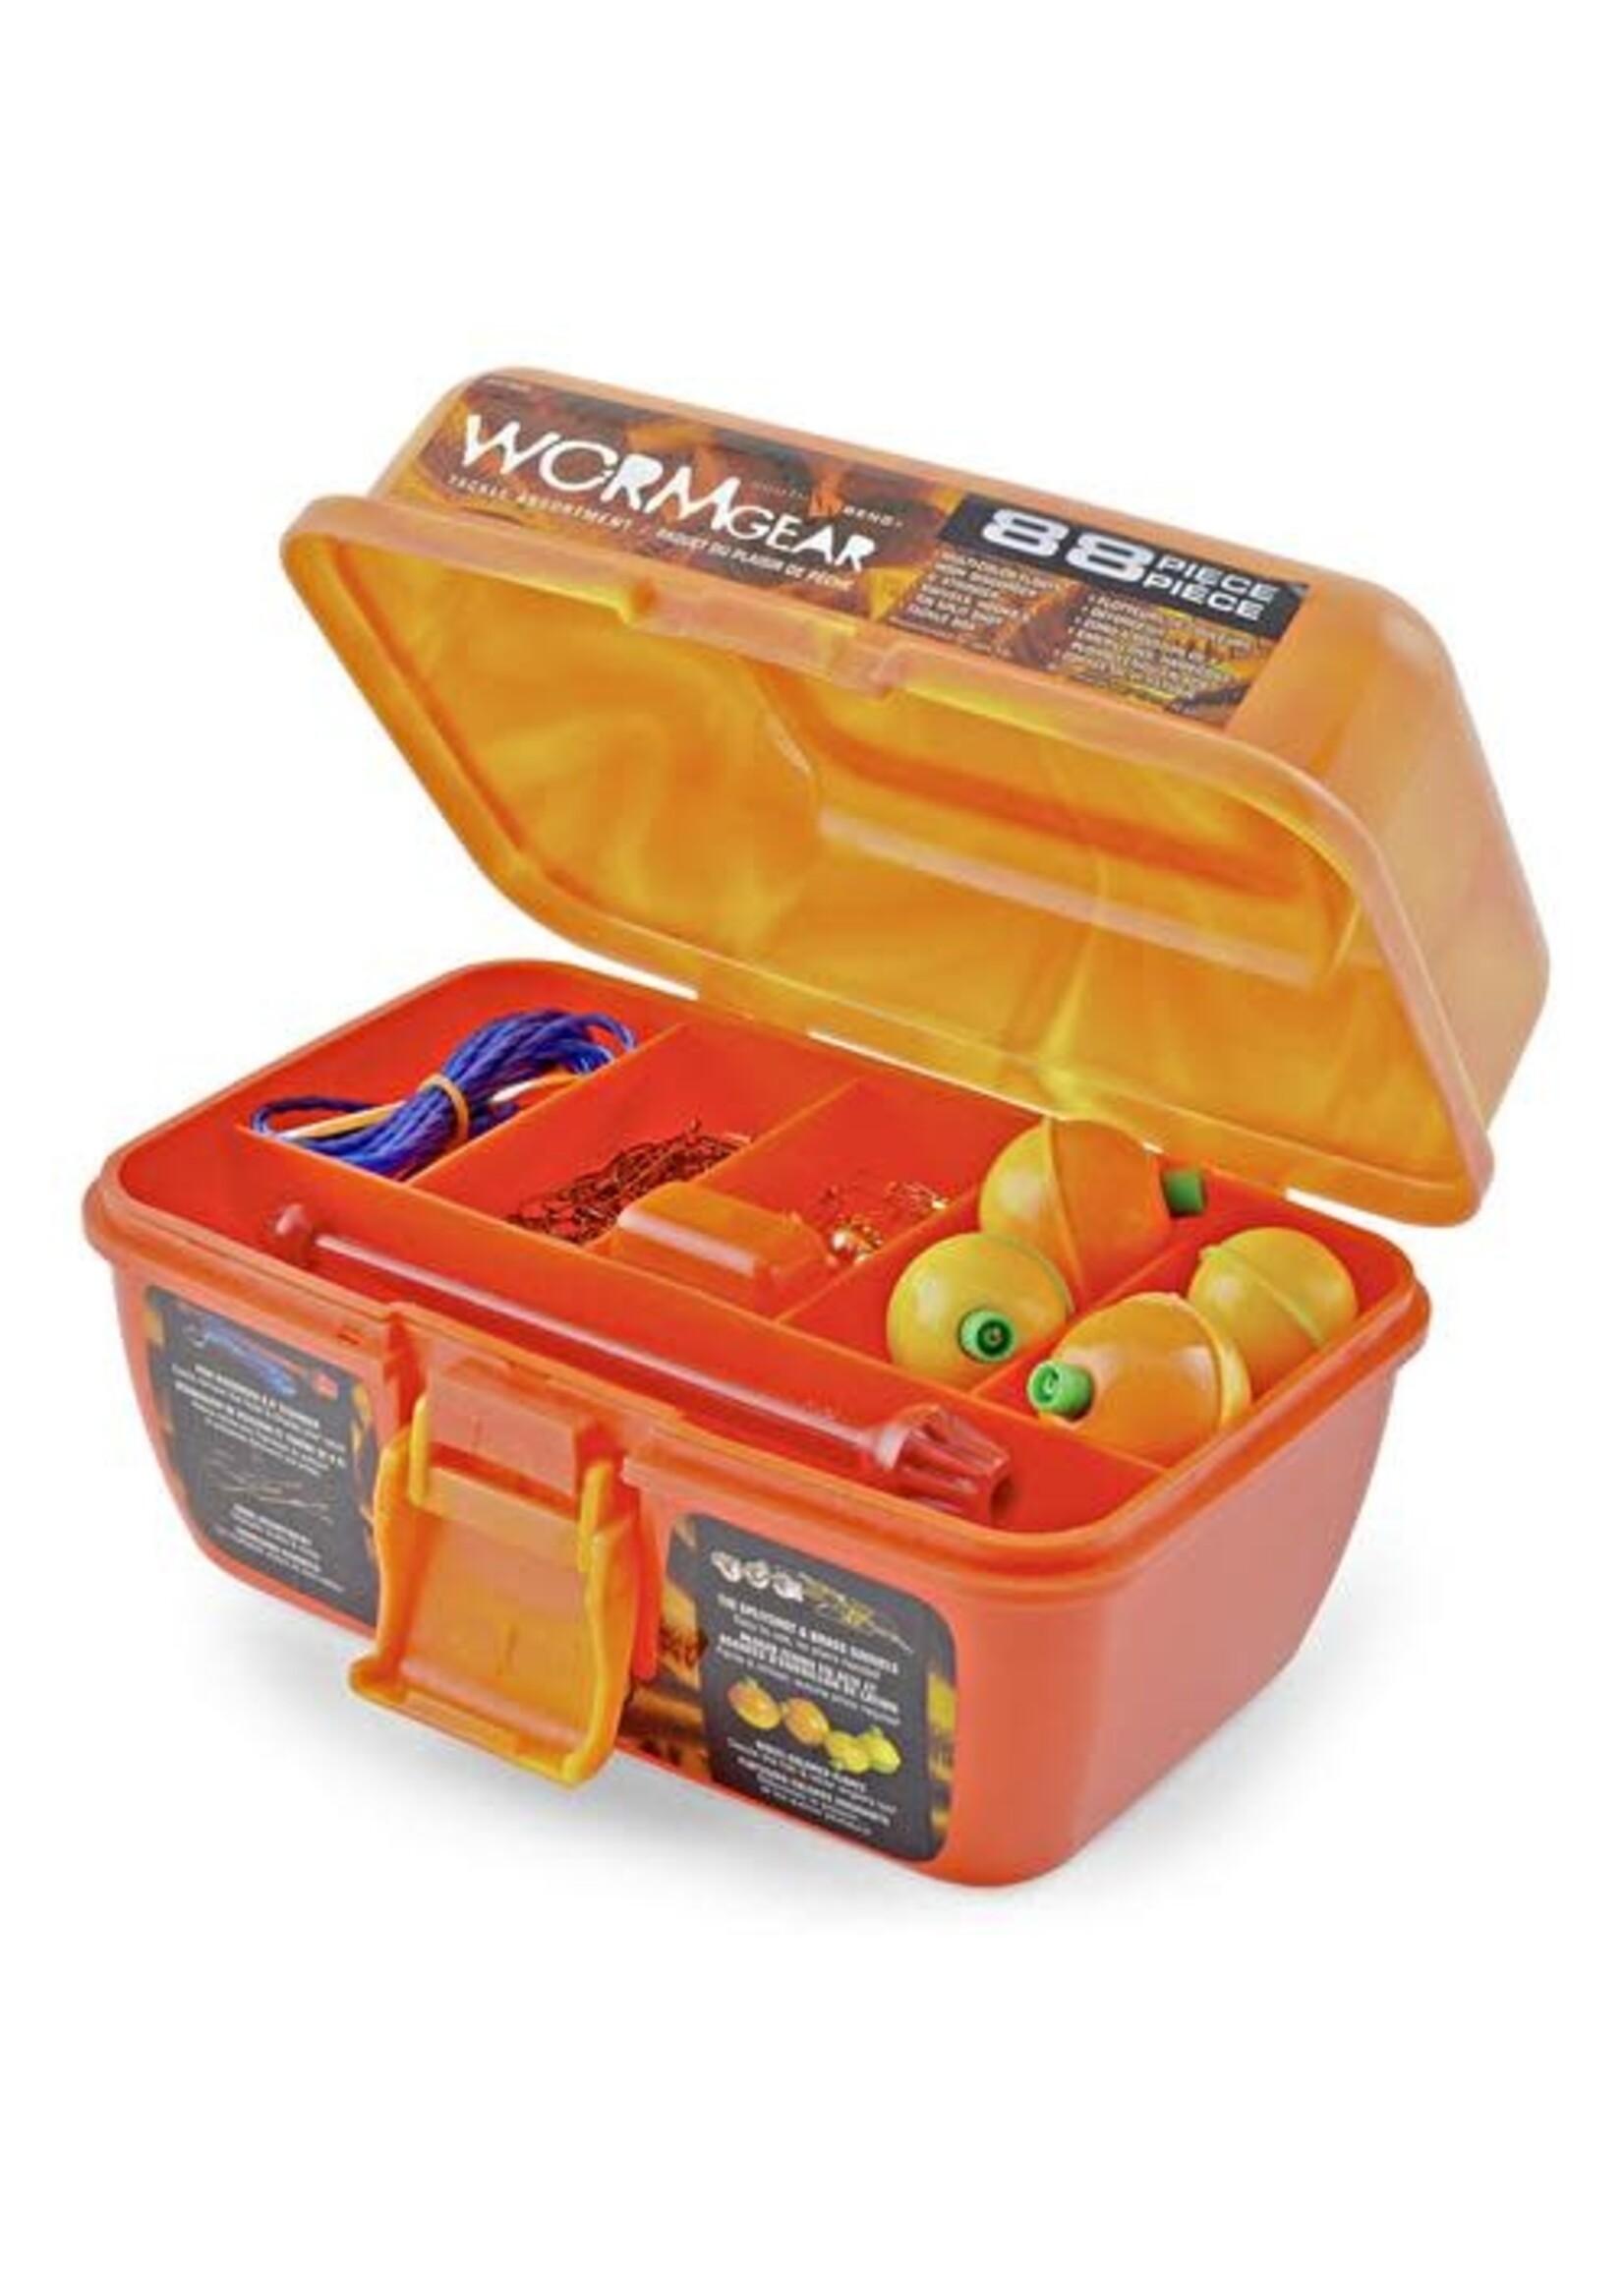 South Bend Worm Gear 88 Piece Loaded Tackle Box